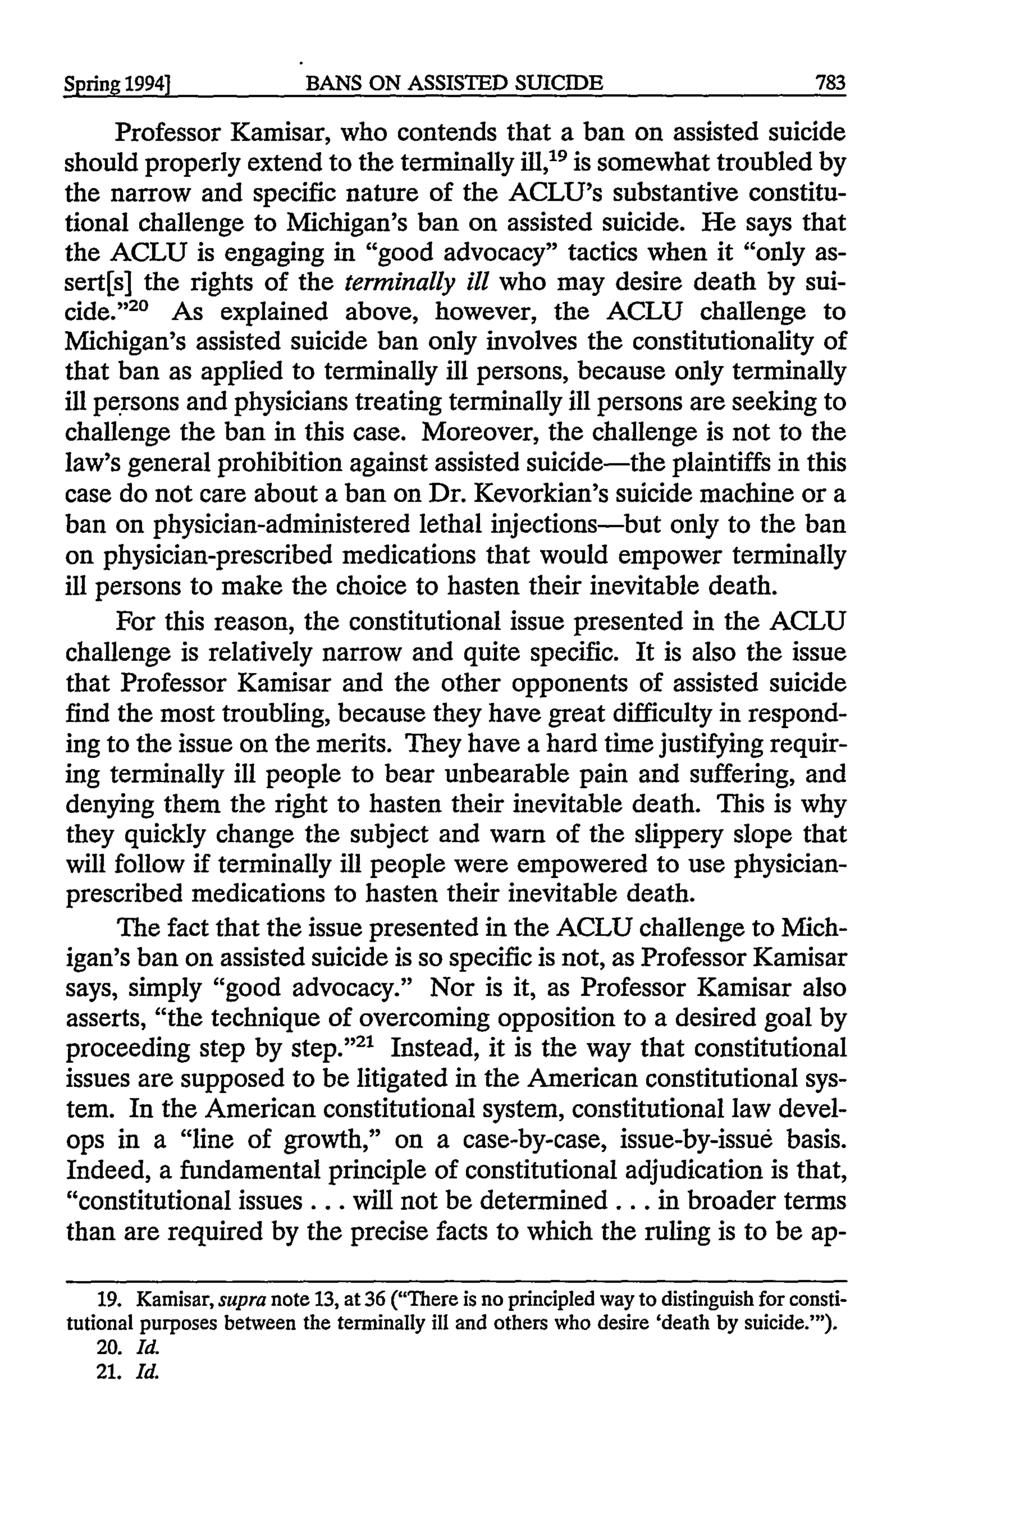 Spring 19941 BANS ON ASSISTED SUICIDE Professor Kamisar, who contends that a ban on assisted suicide should properly extend to the terminally ill, 19 is somewhat troubled by the narrow and specific